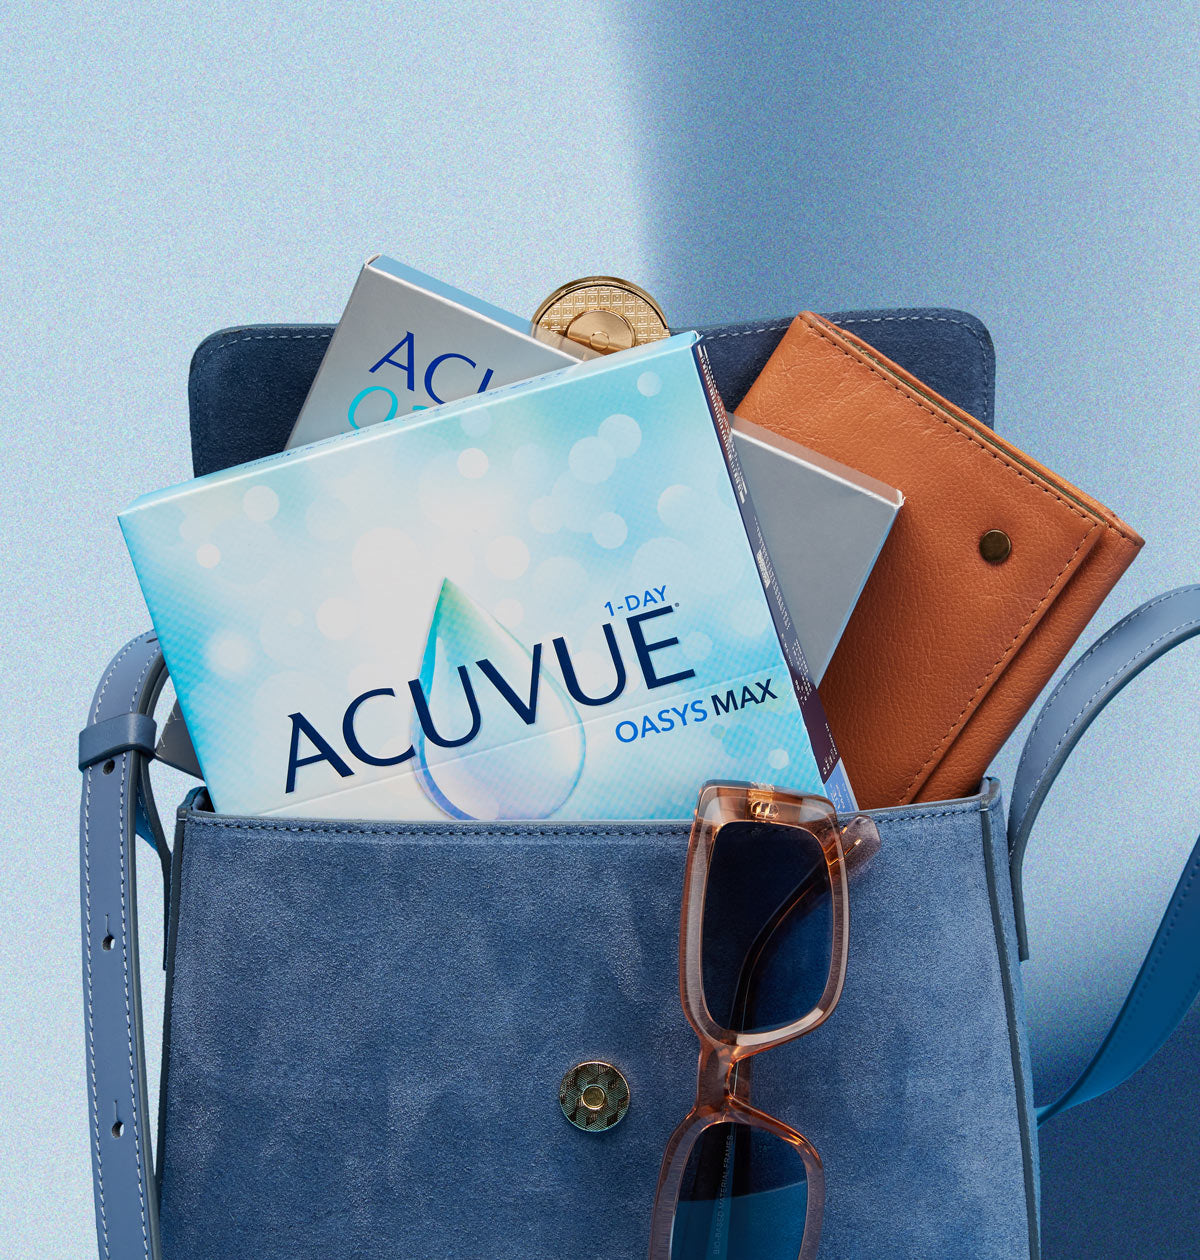 Blue bag with Acuvue contact lens boxes, glasses, and wallet.